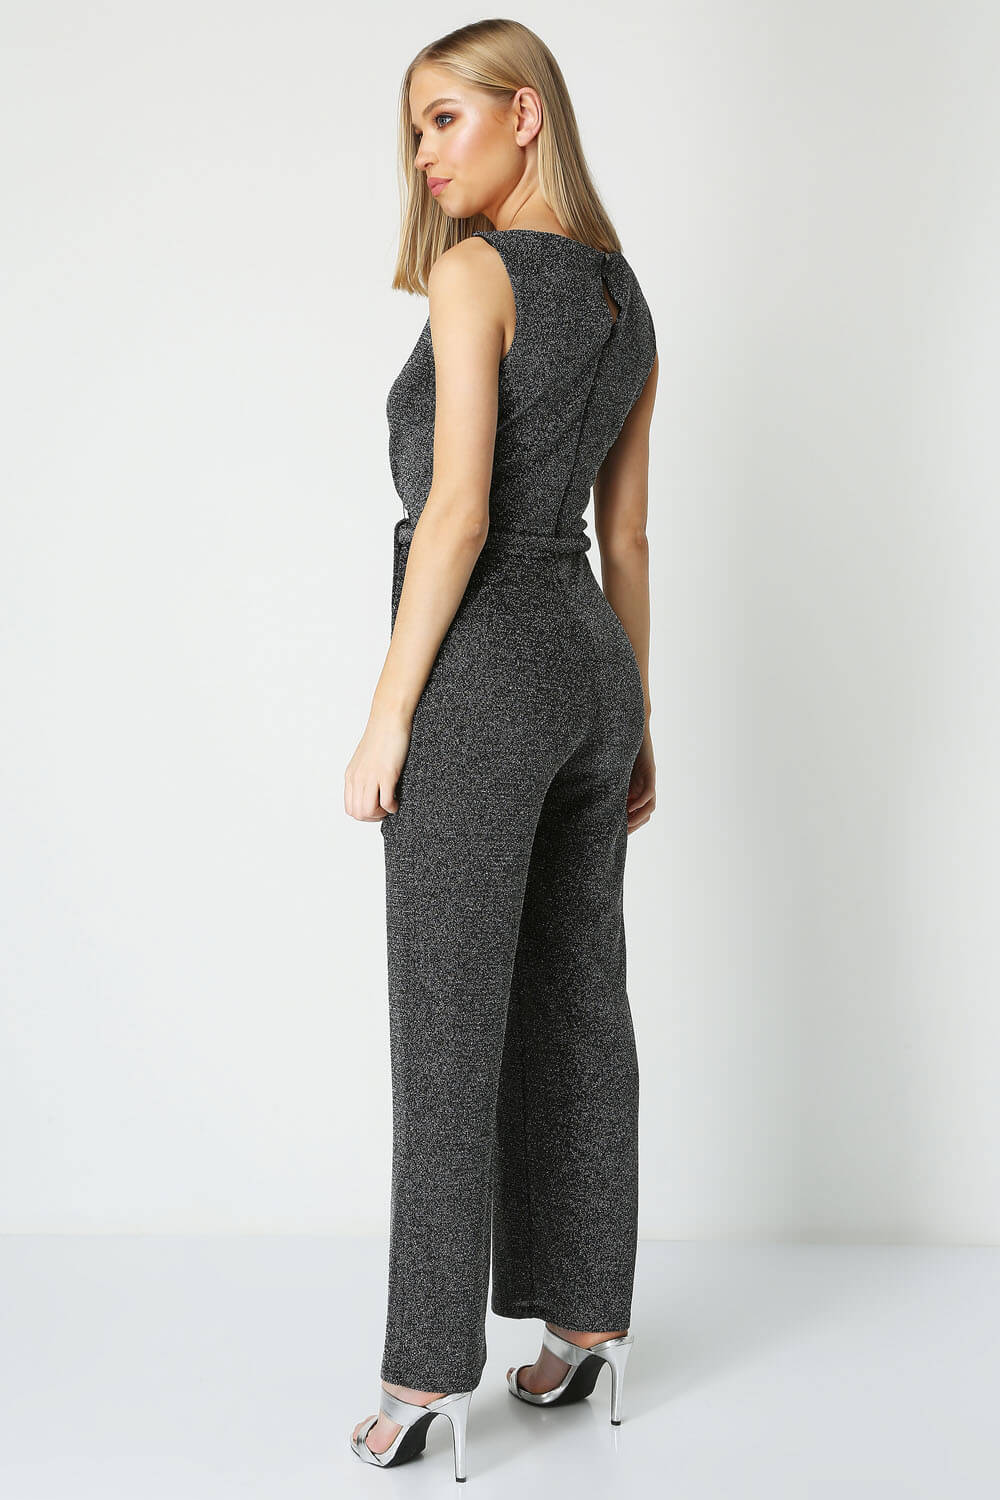 Silver Belted Glitter Jumpsuit, Image 2 of 4